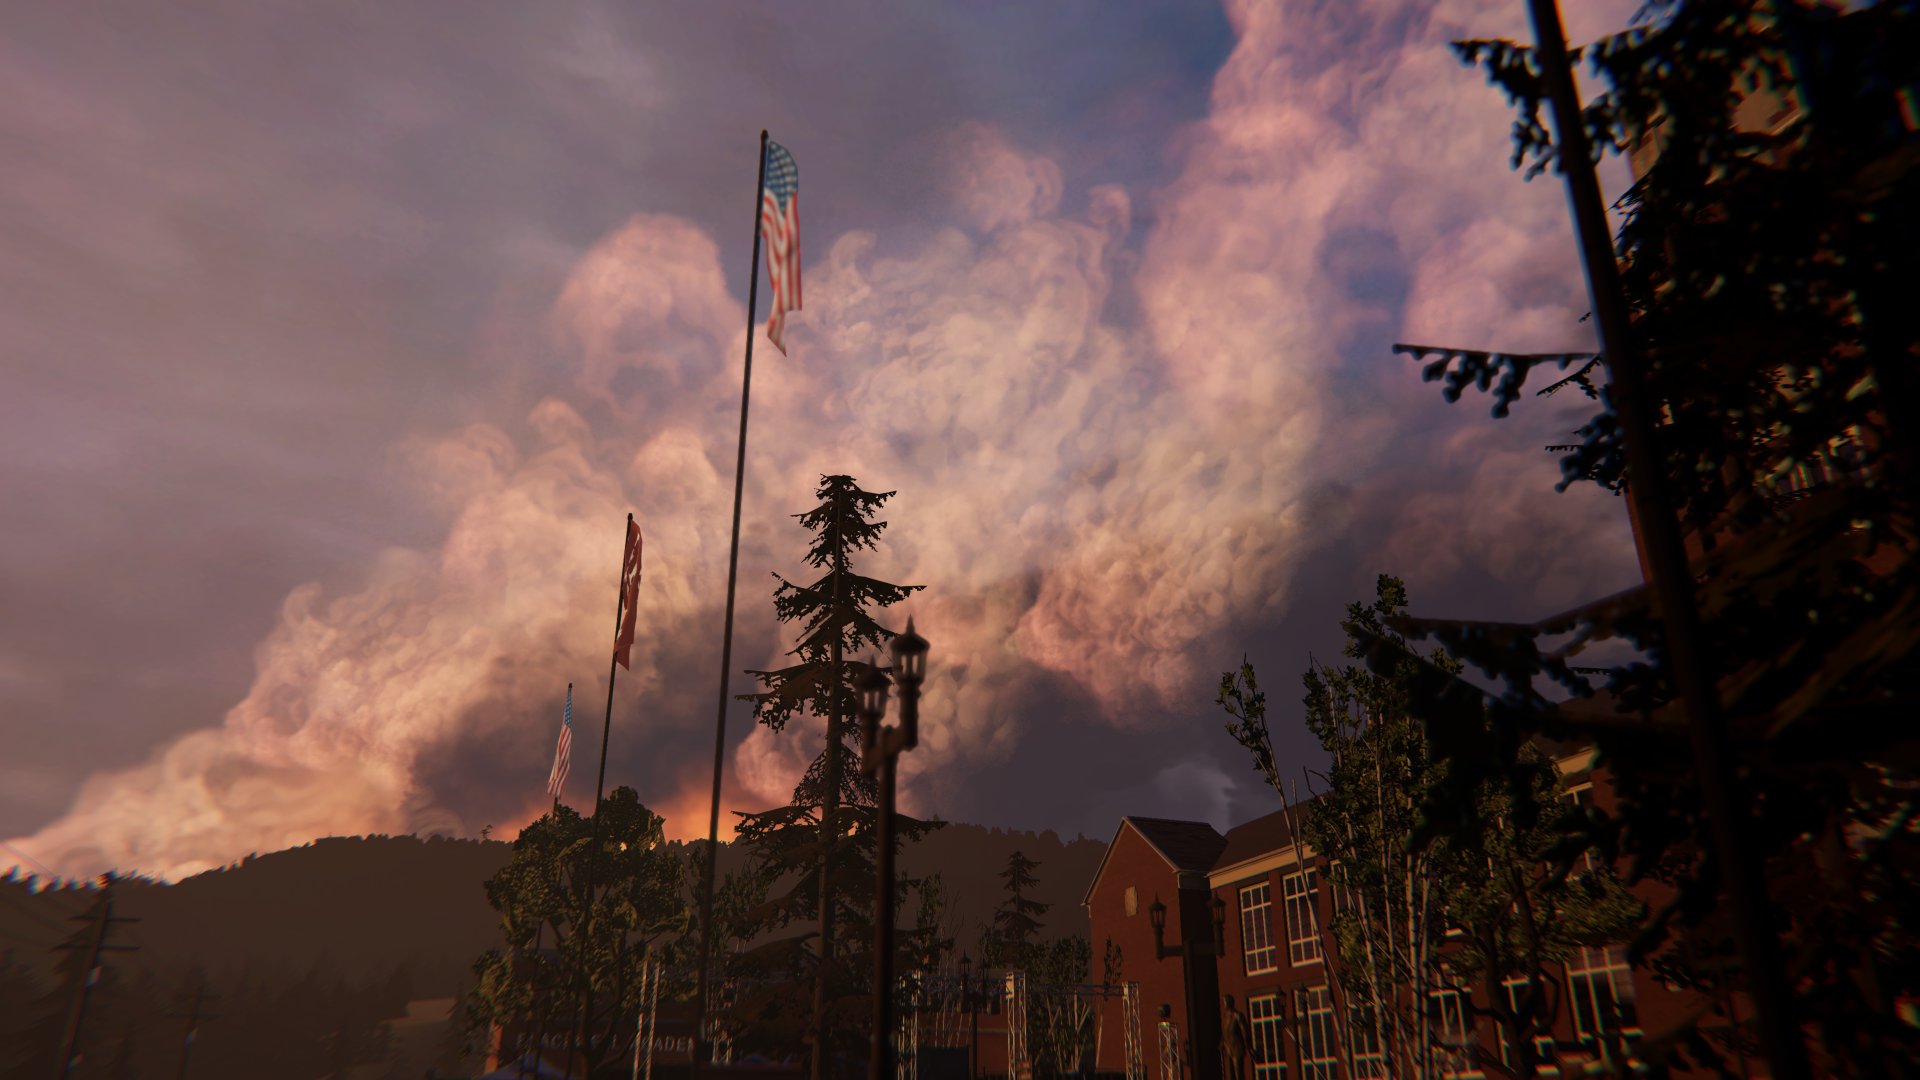 Life is Strange: Before the Storm Episode Two Available Now on Xbox One